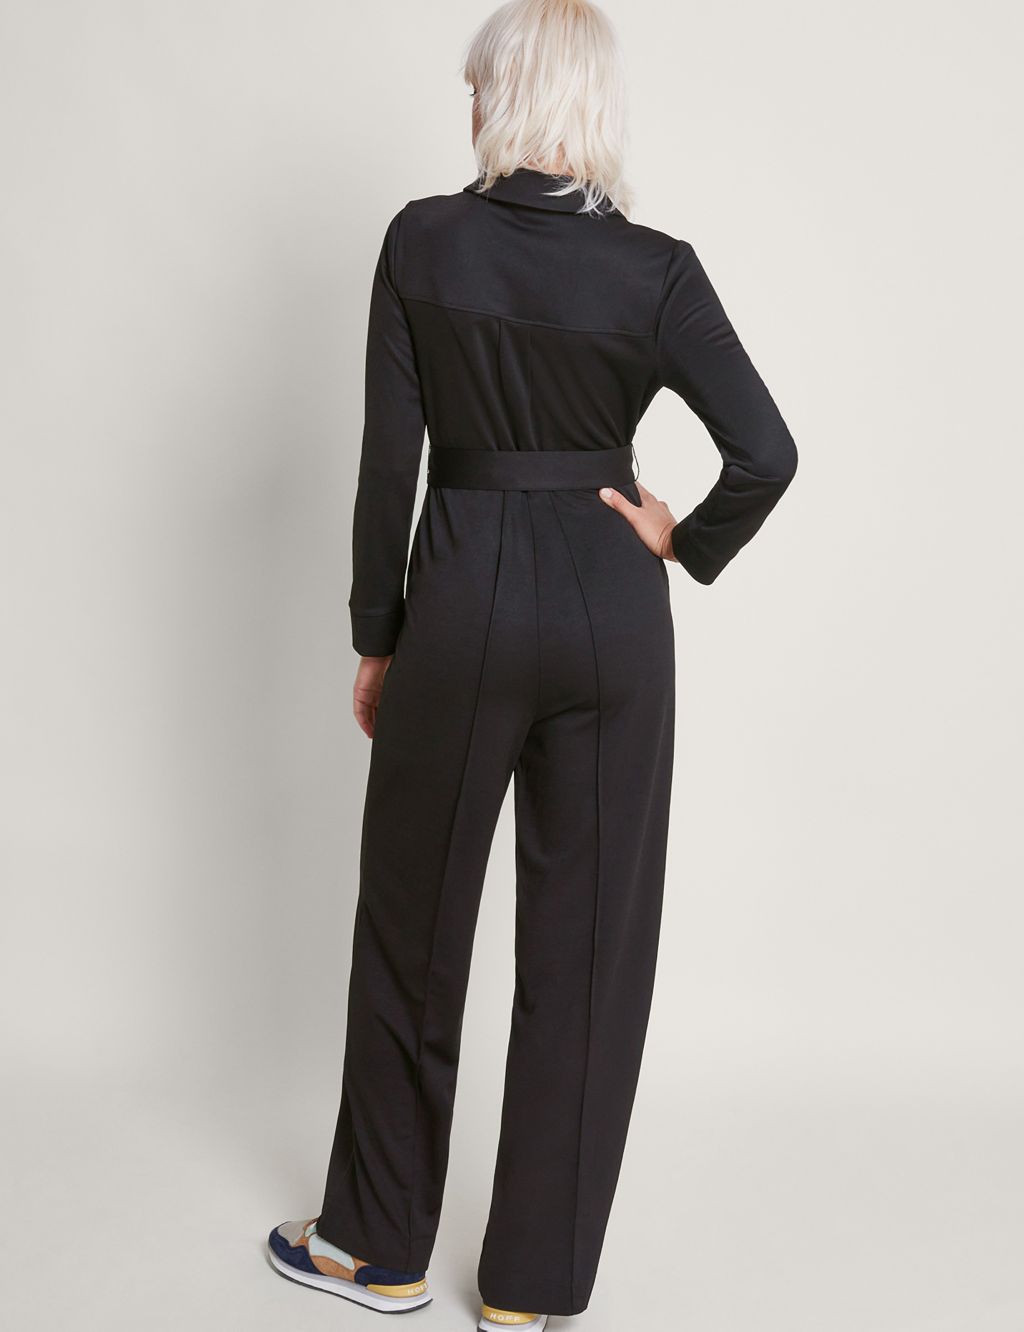 Jersey Button Front Long Sleeve Jumpsuit image 3